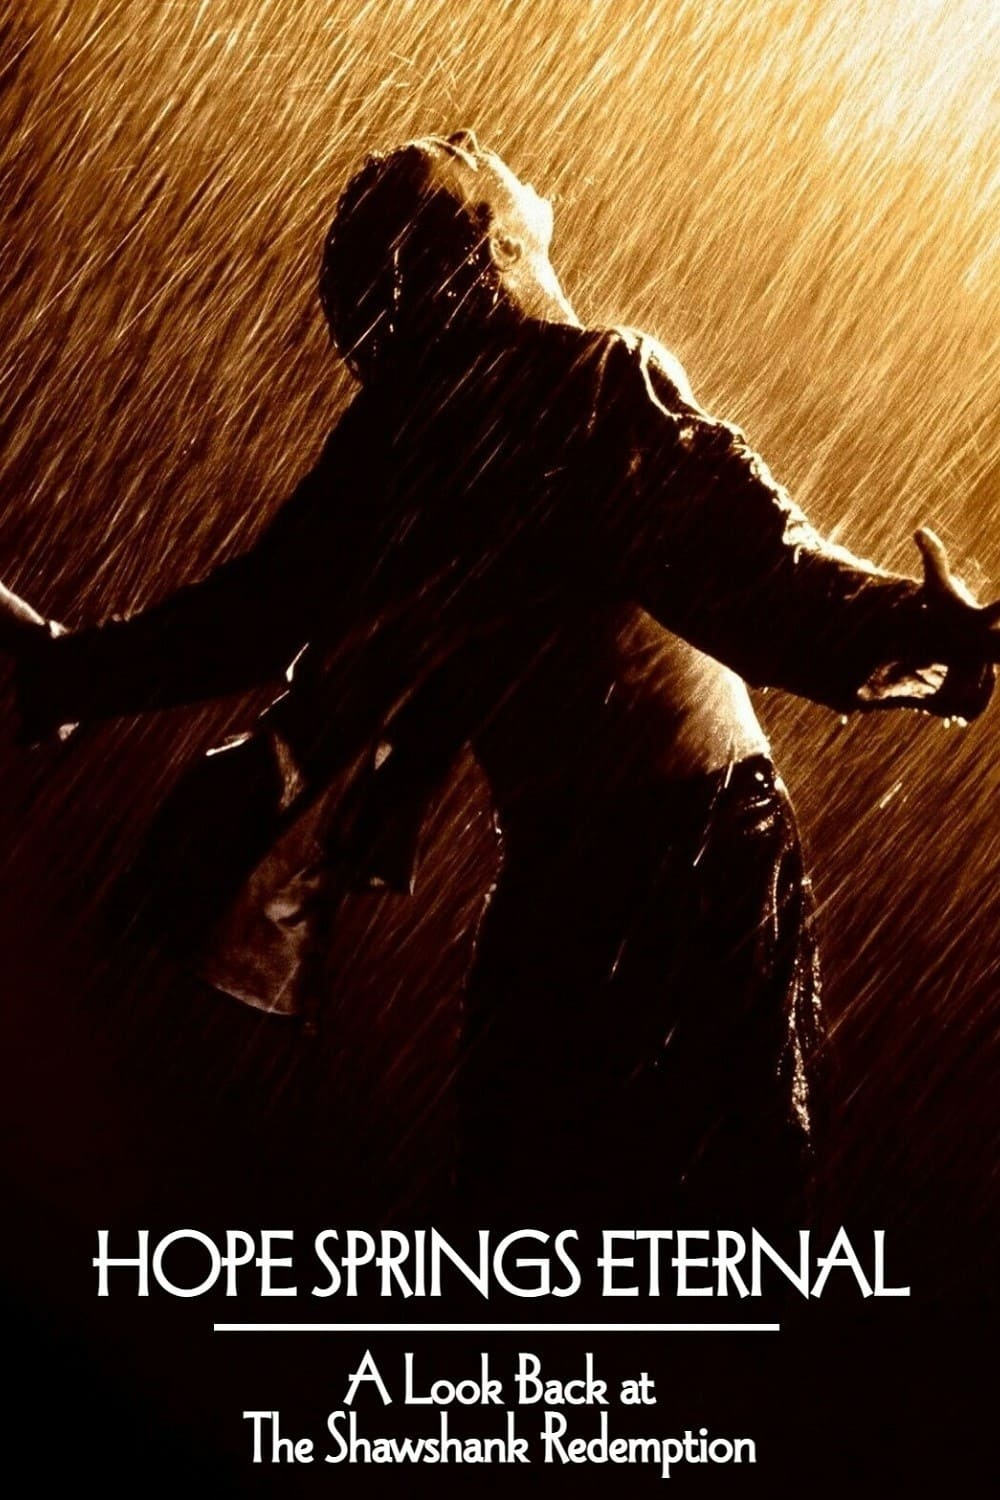 Hope Springs Eternal: A Look Back at The Shawshank Redemption